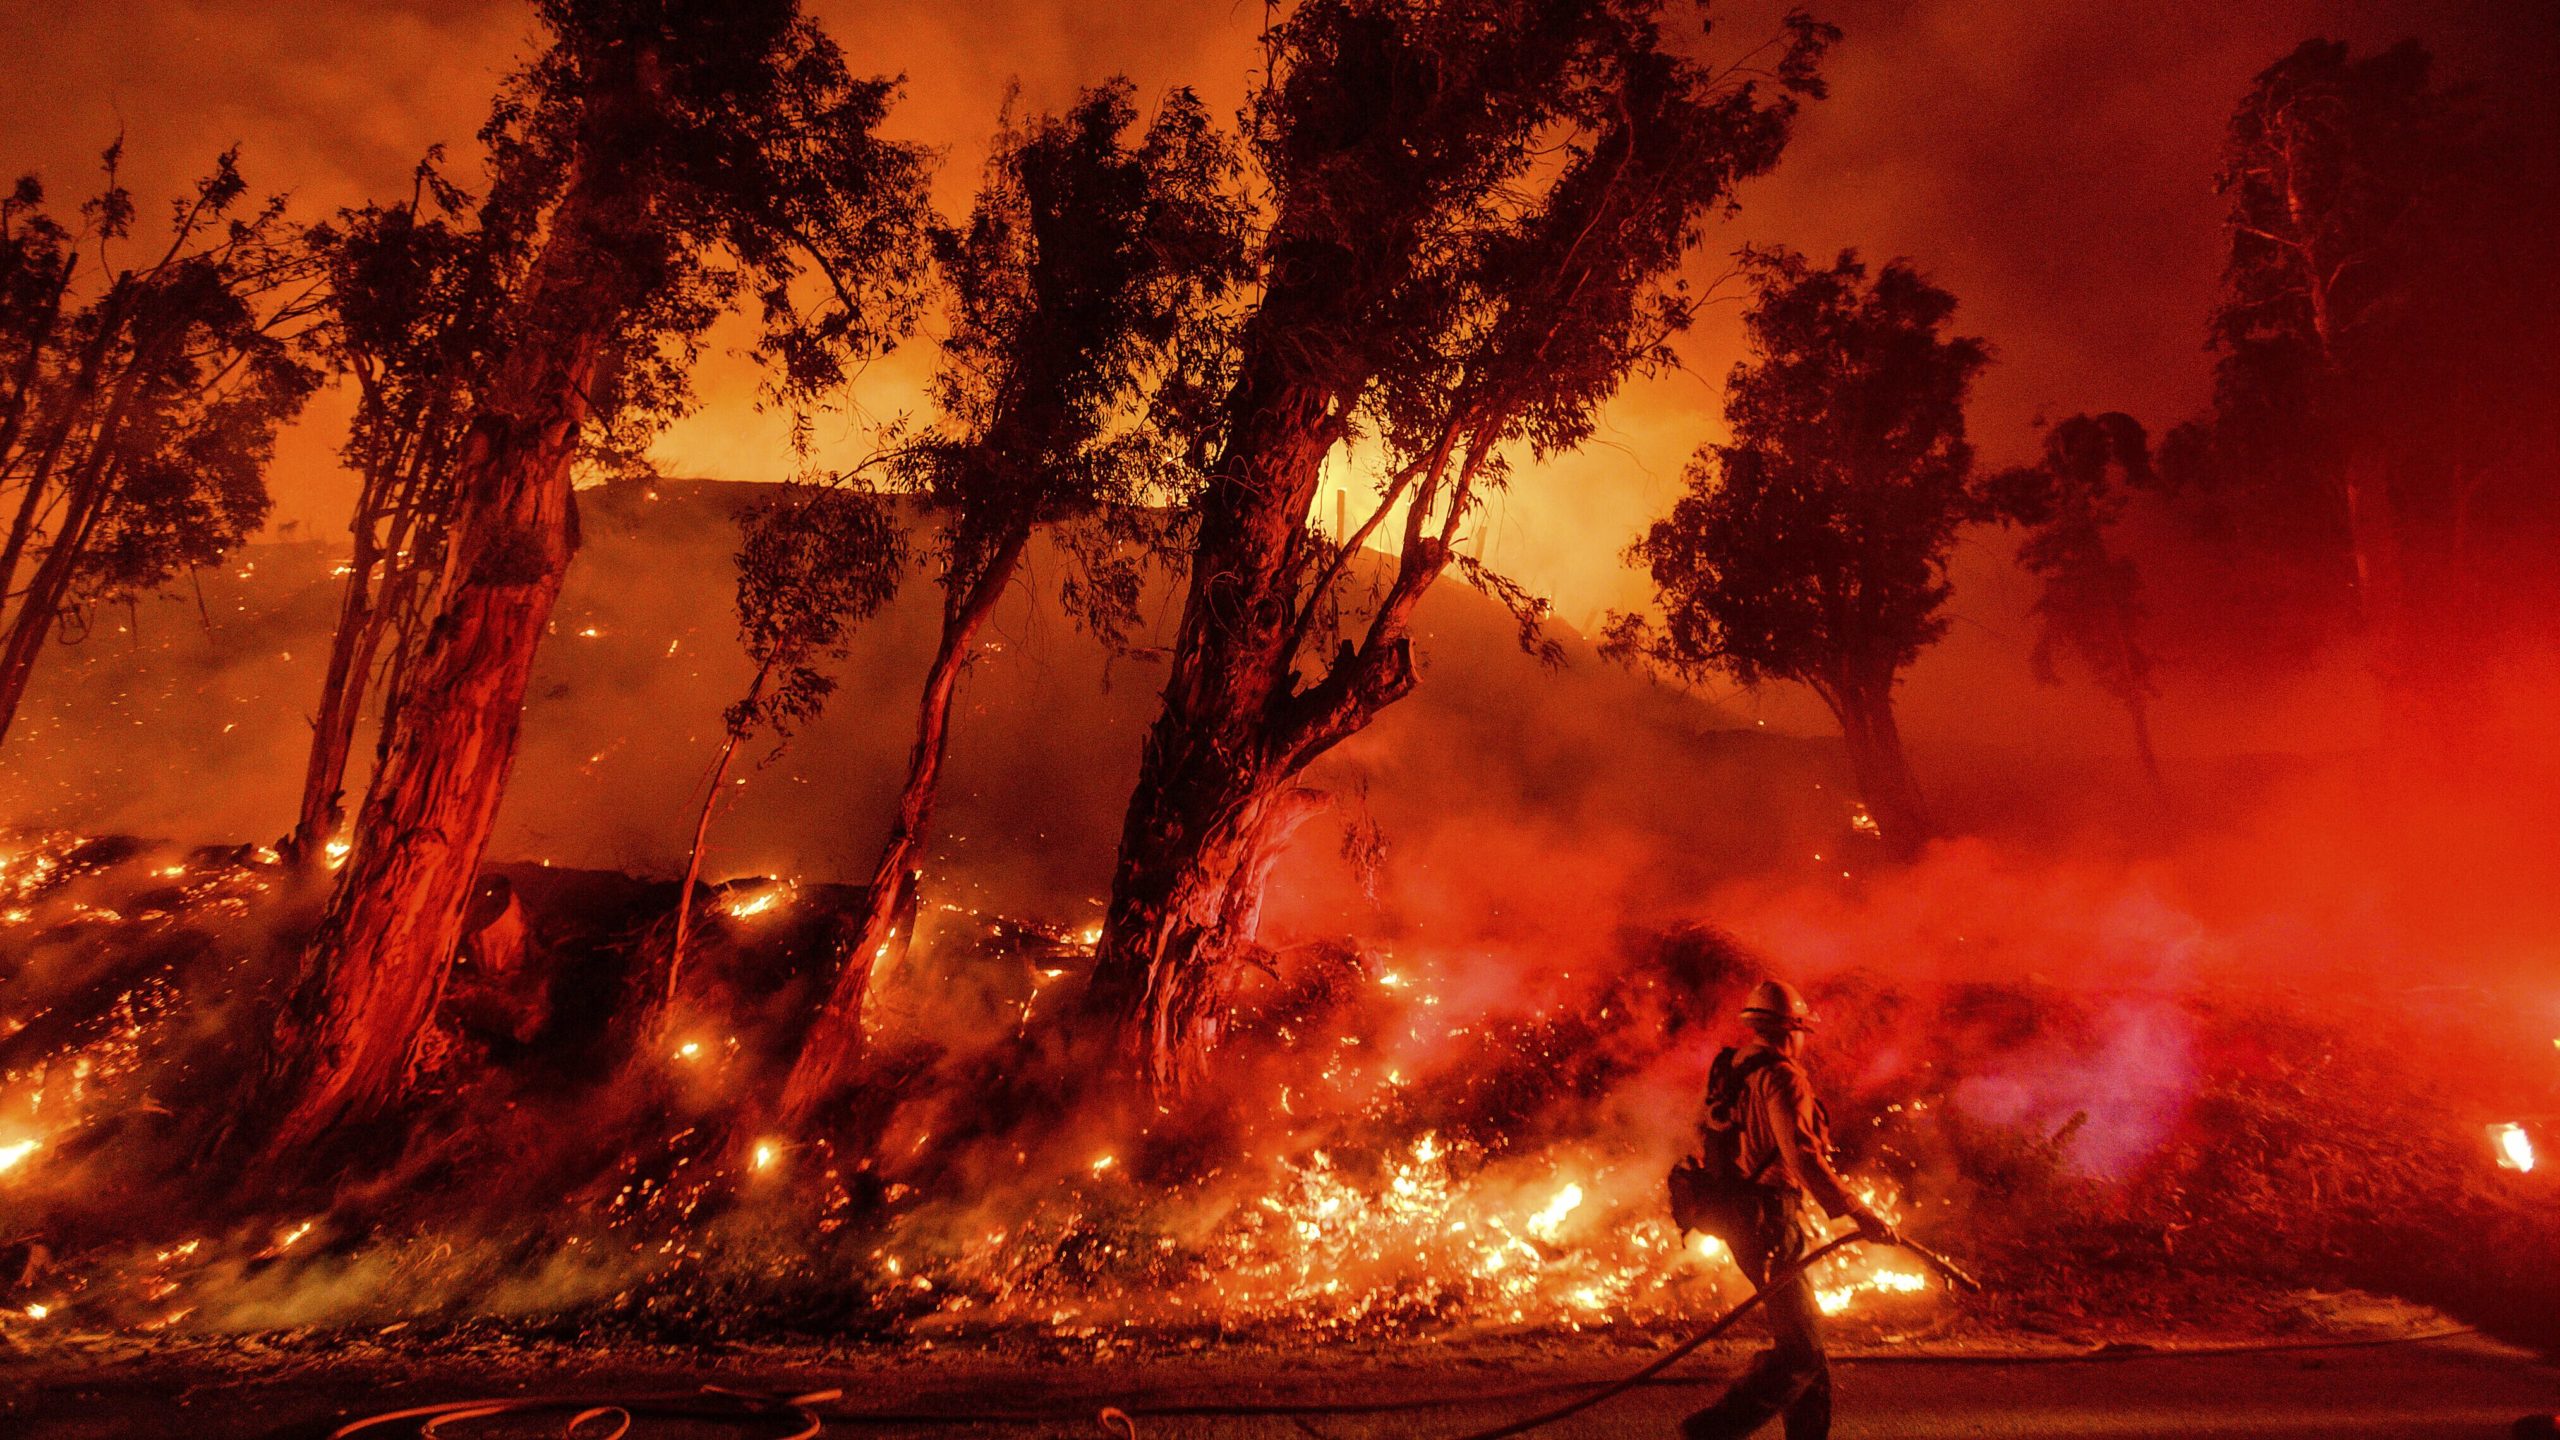 Vehicle malfunction sparked Southern California wildfire